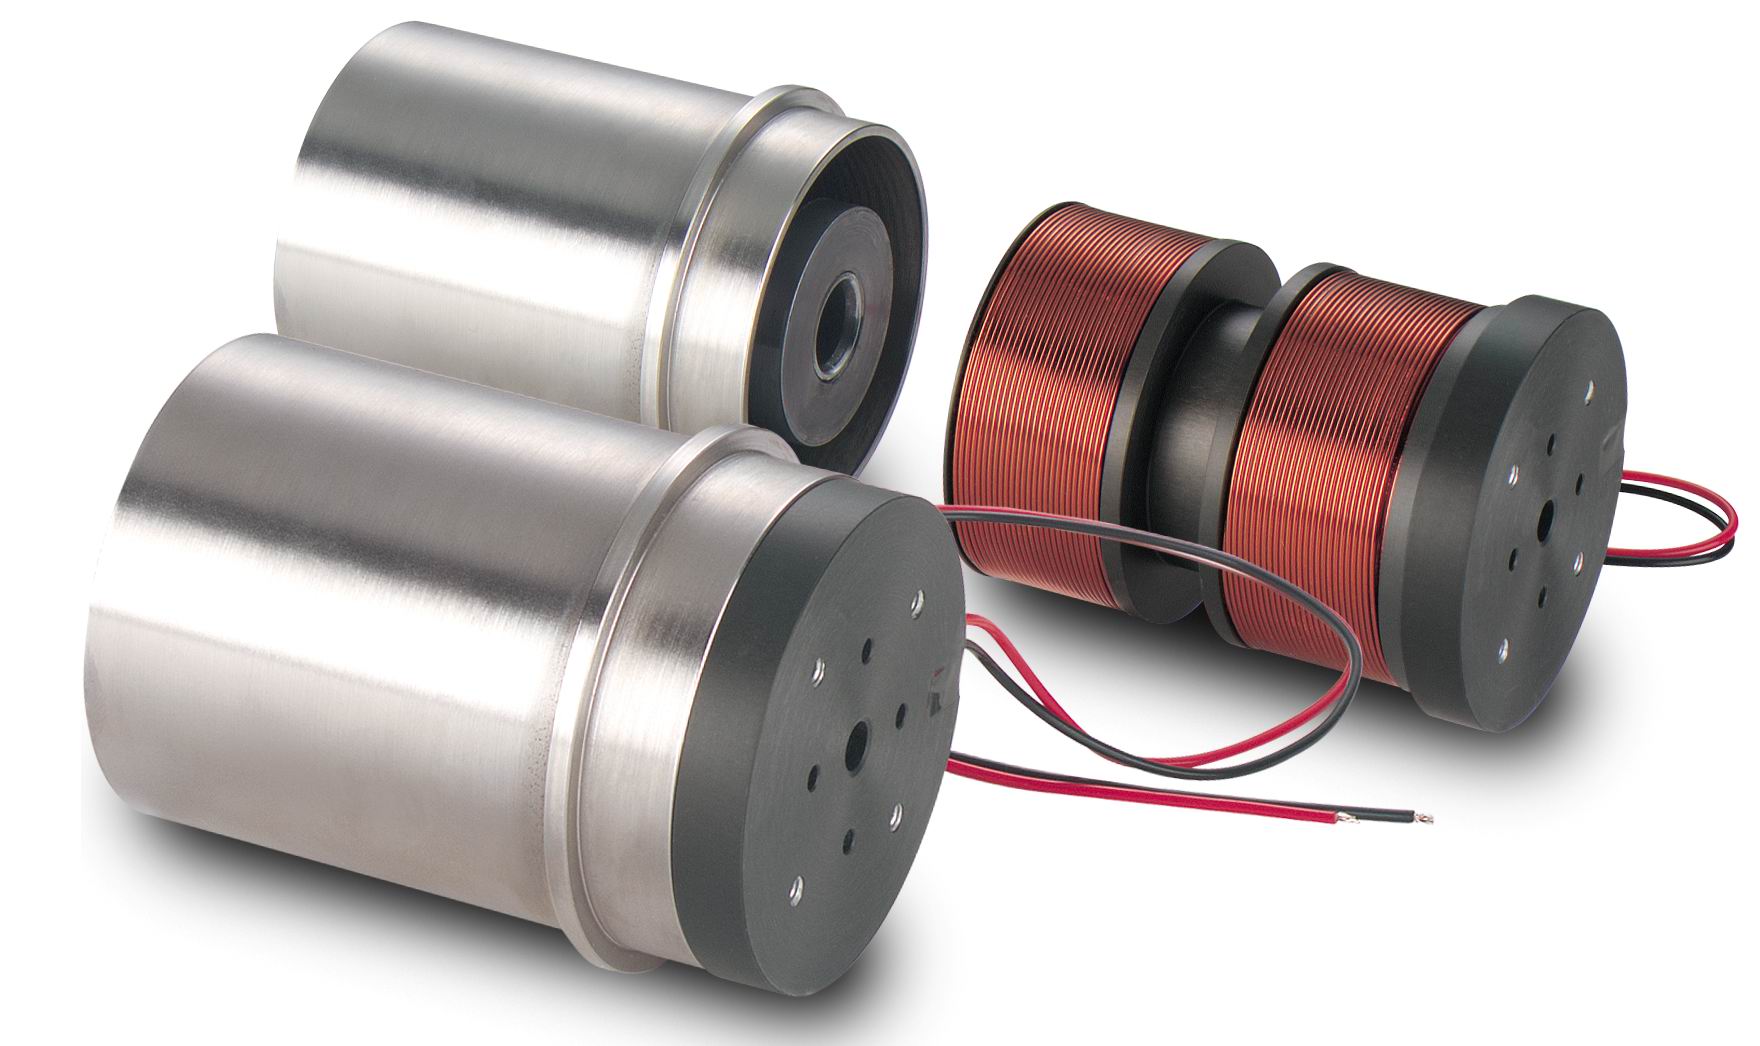 BEI Kimco Magnetics Voice Coil Actuator Solves Demanding Application Requirements for High Force Density Capabilities